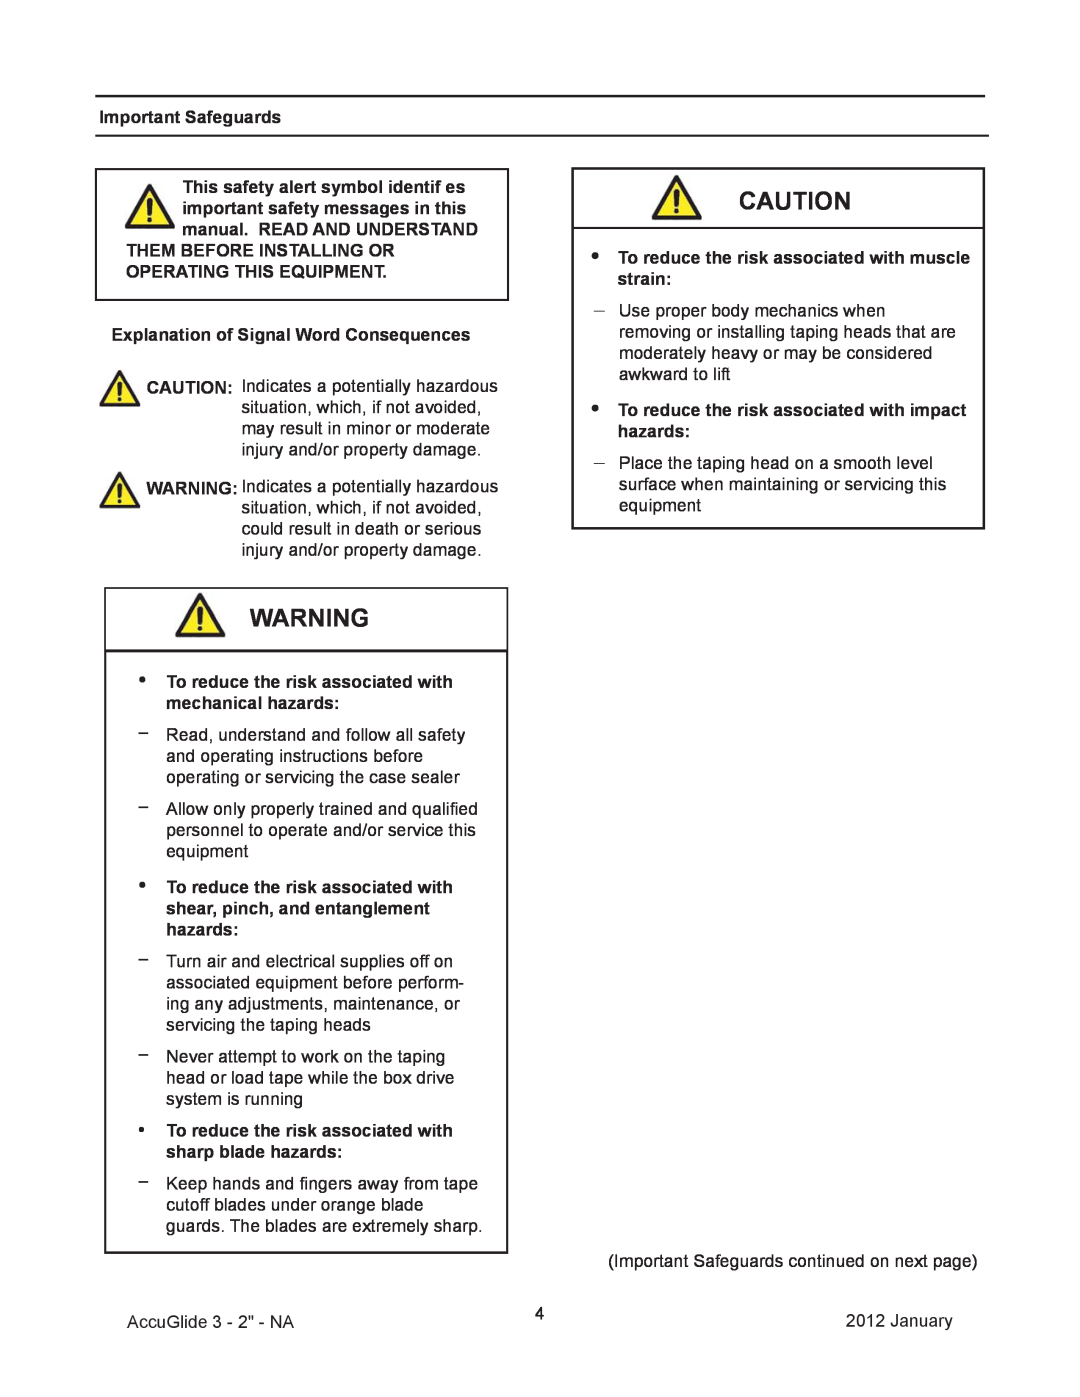 3M 40800 Important Safeguards, Them Before Installing Or Operating This Equipment, Explanation of Signal Word Consequences 